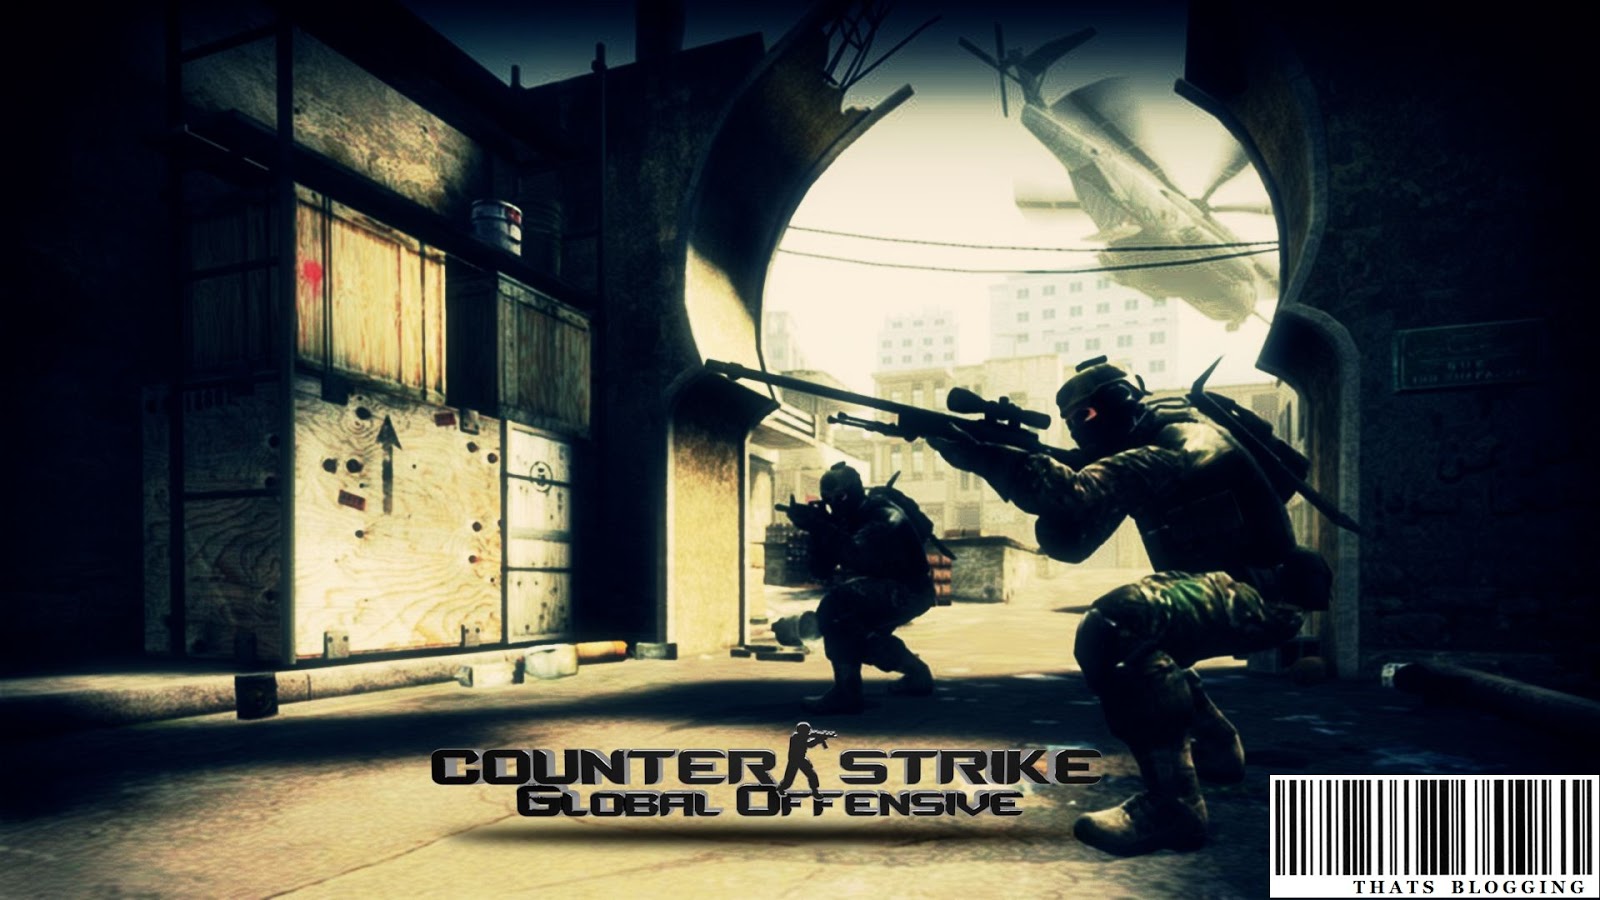 Download Counter Strike High Definition Wallpapers Blogging